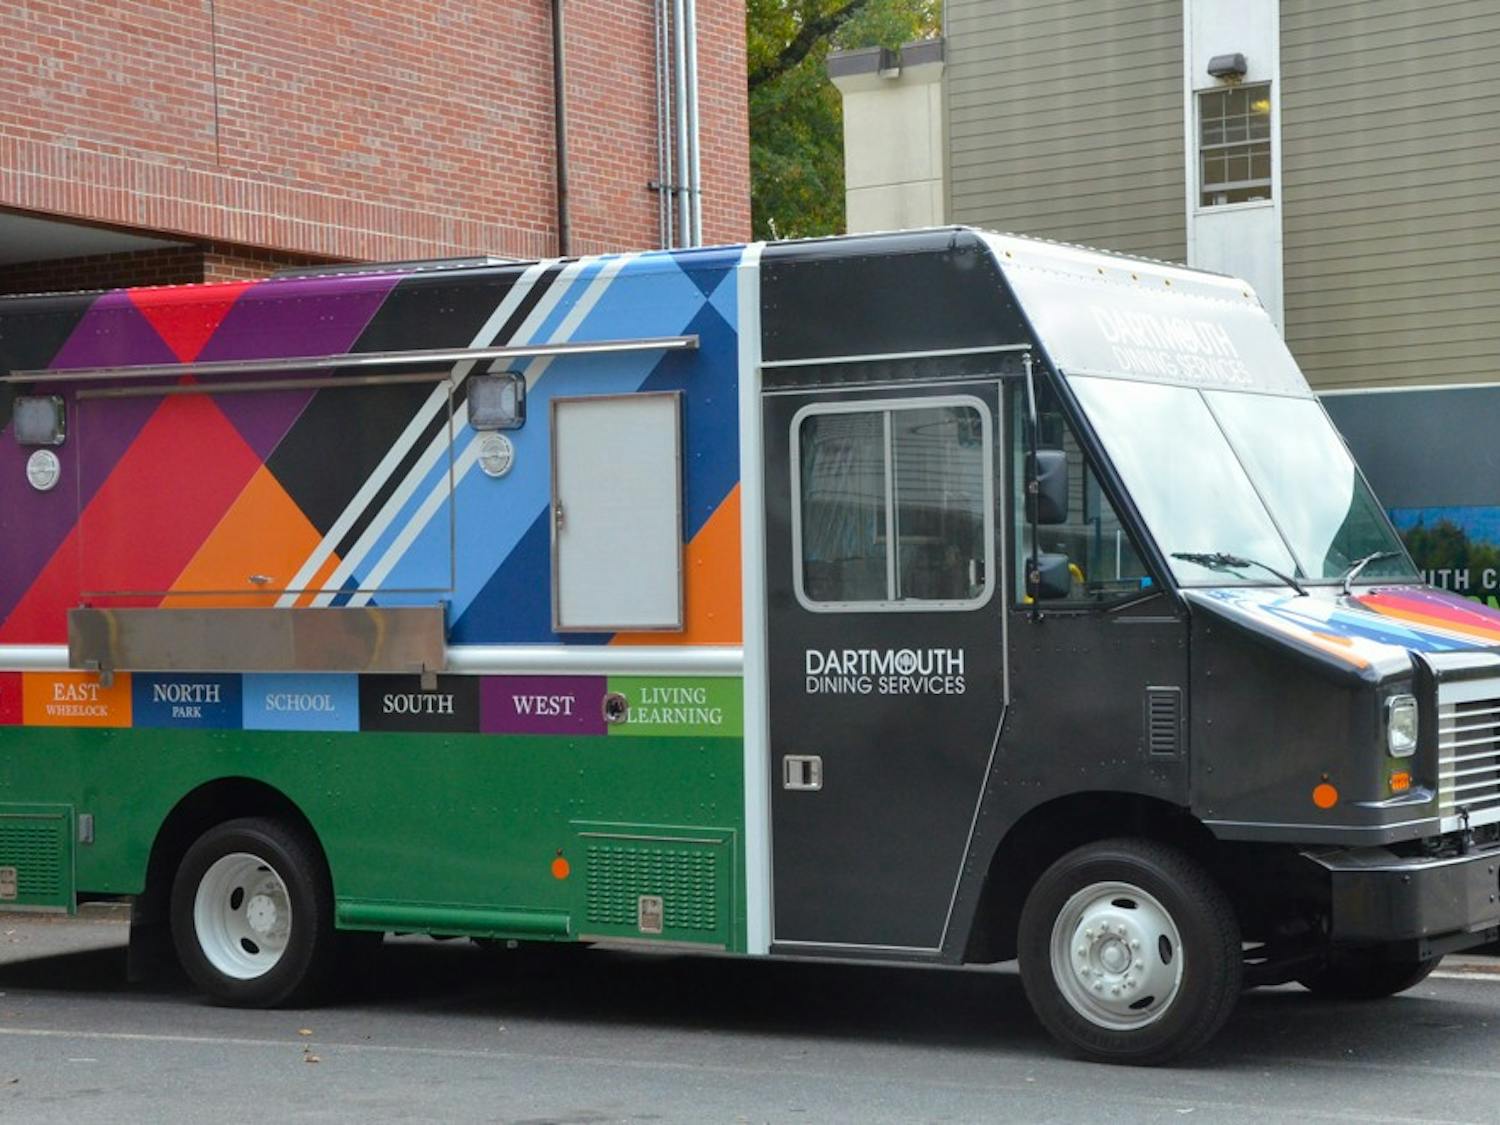 The Dartmouth Dining Services food truck offers a new menu this winter.